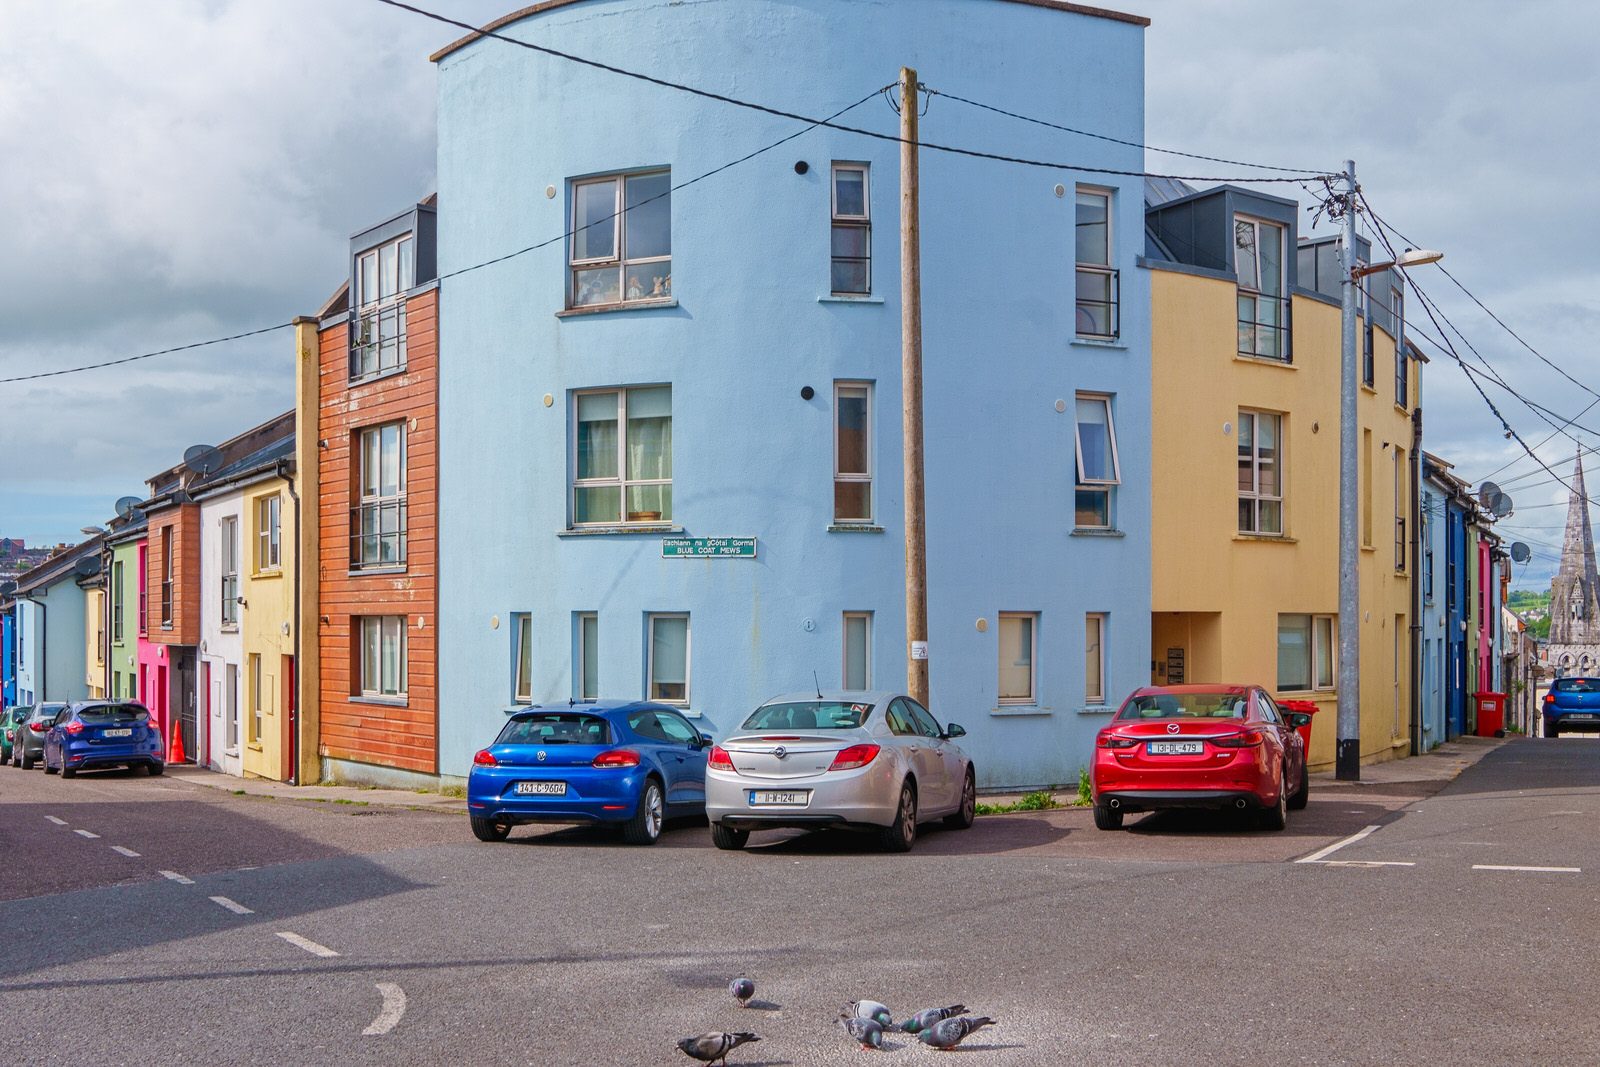 BLUE COAT MEWS IN CORK CITY [AT THE JUNCTION OF ST KEVIN'S STREET AND STEPHEN STREET]